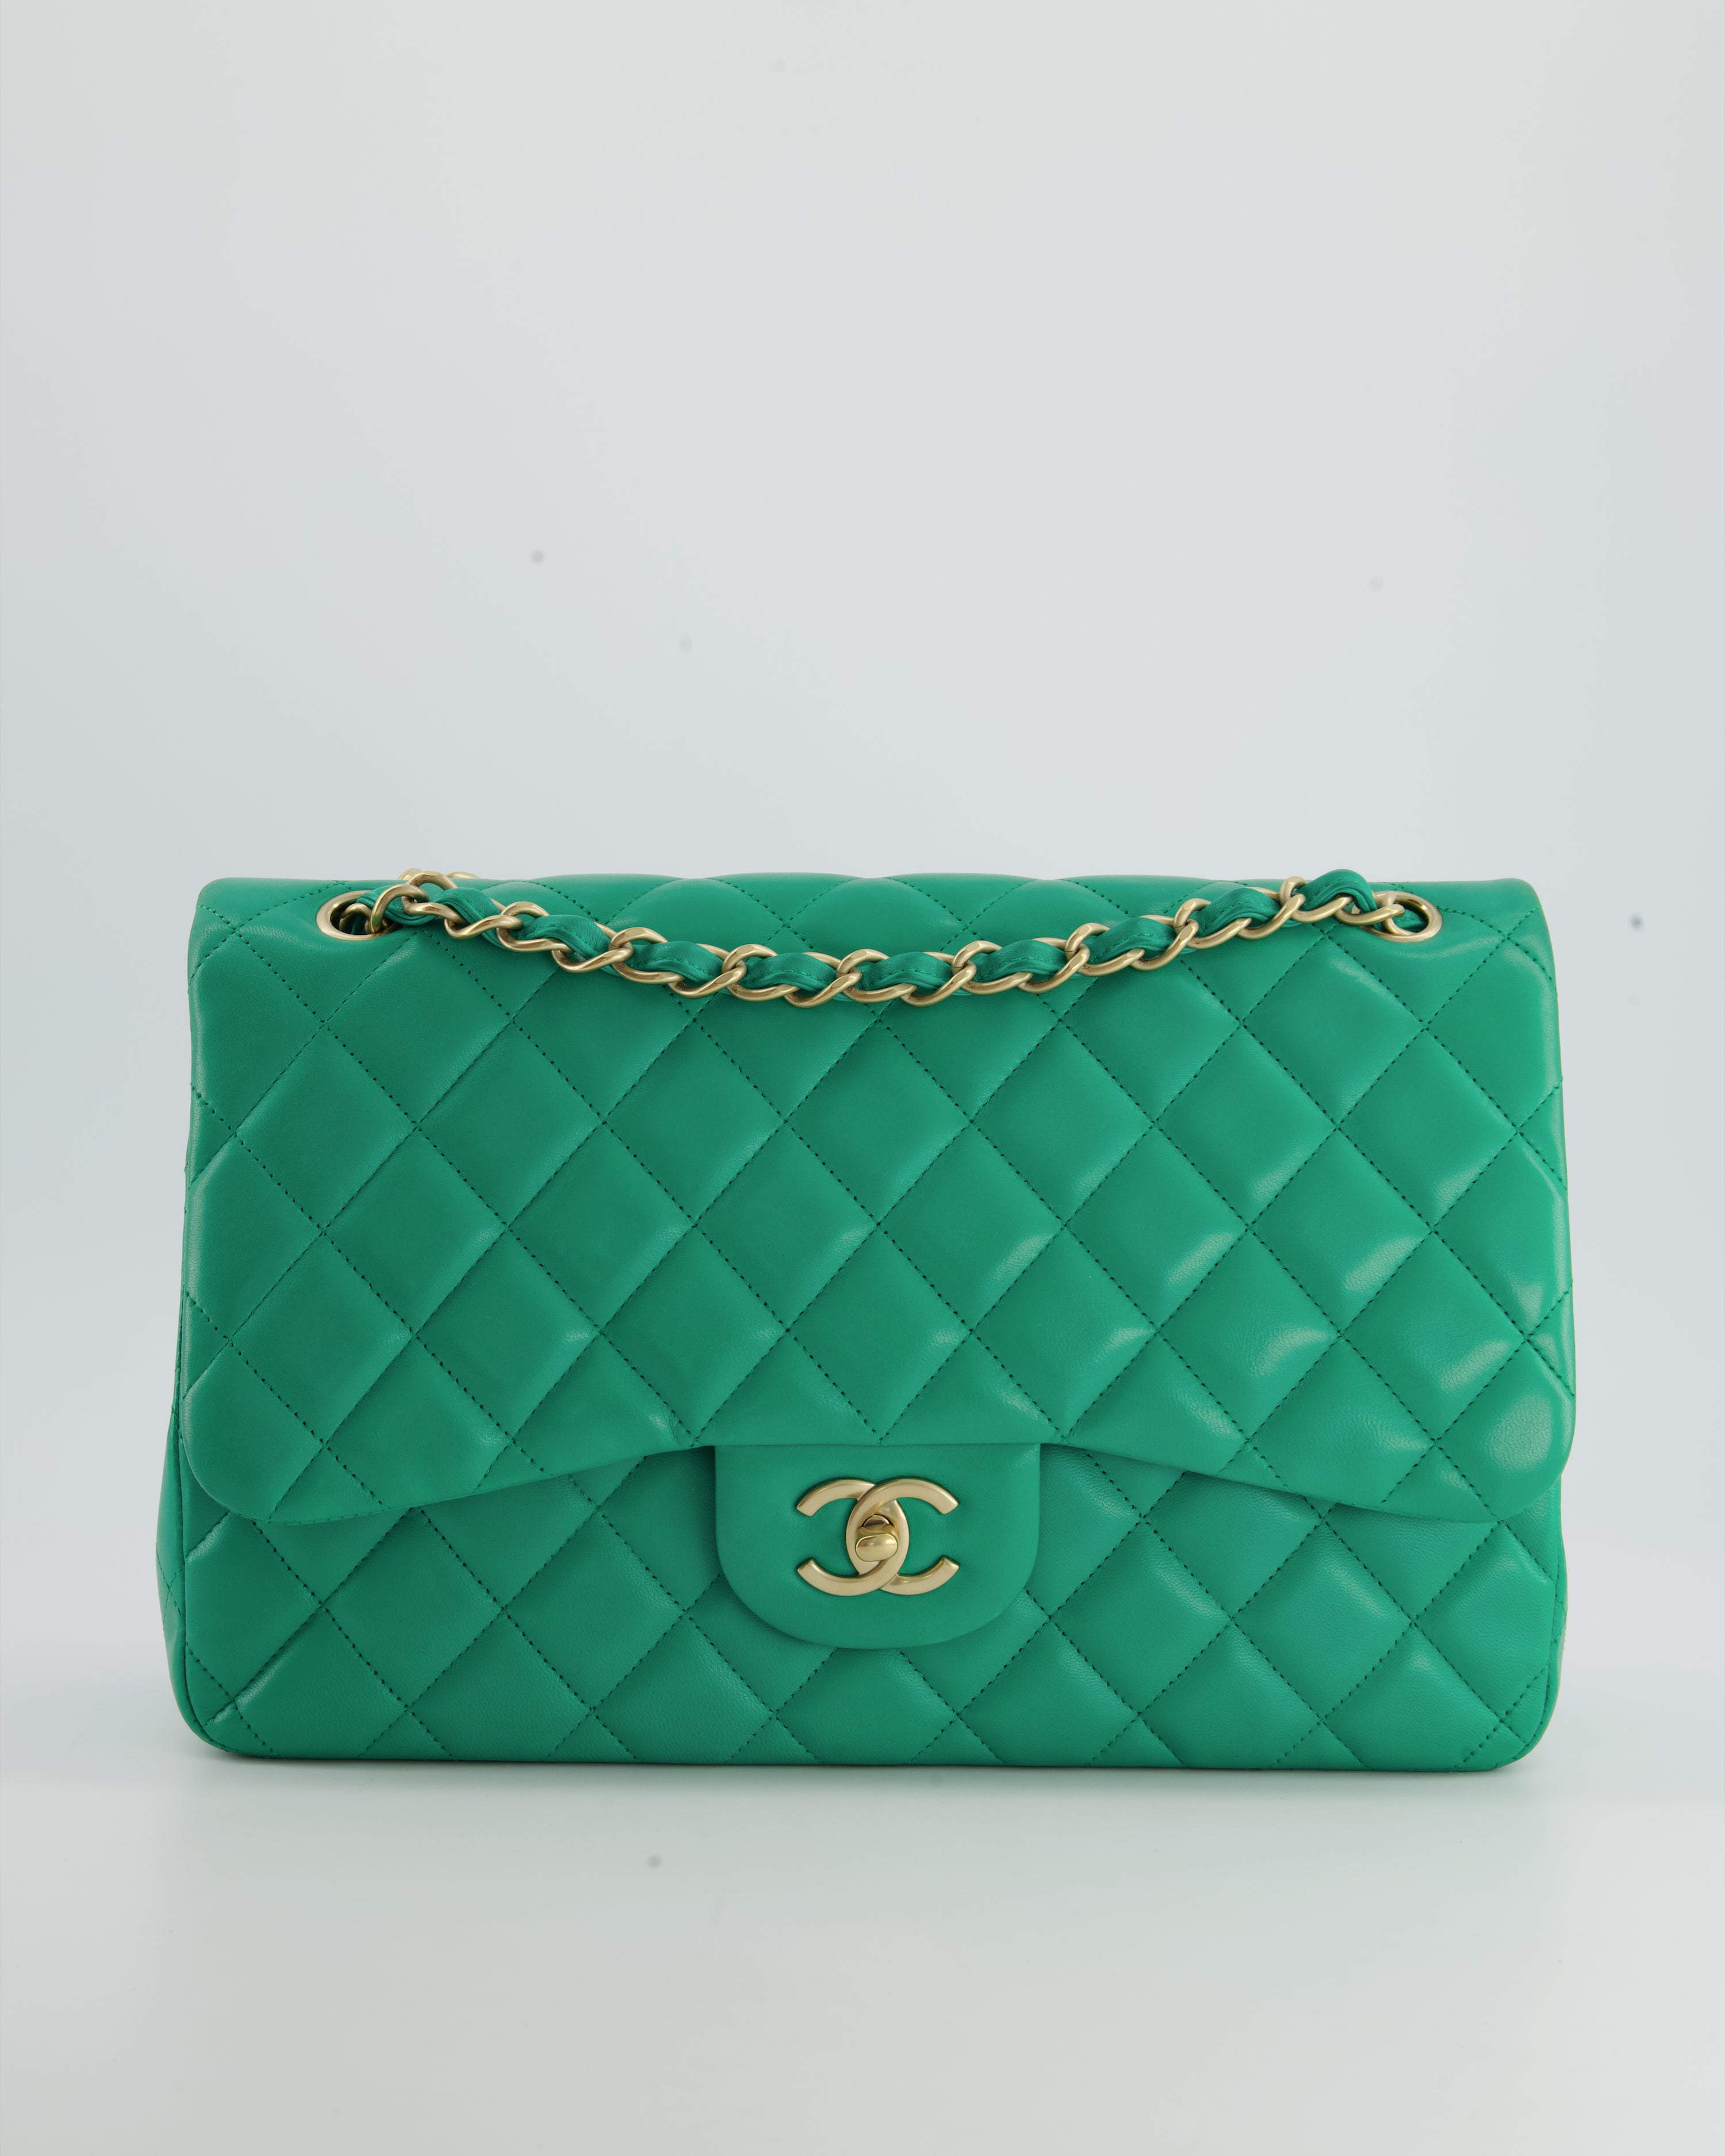 Sold at Auction Chanel Emerald Green Quilted Lambskin 19 Bag WBox